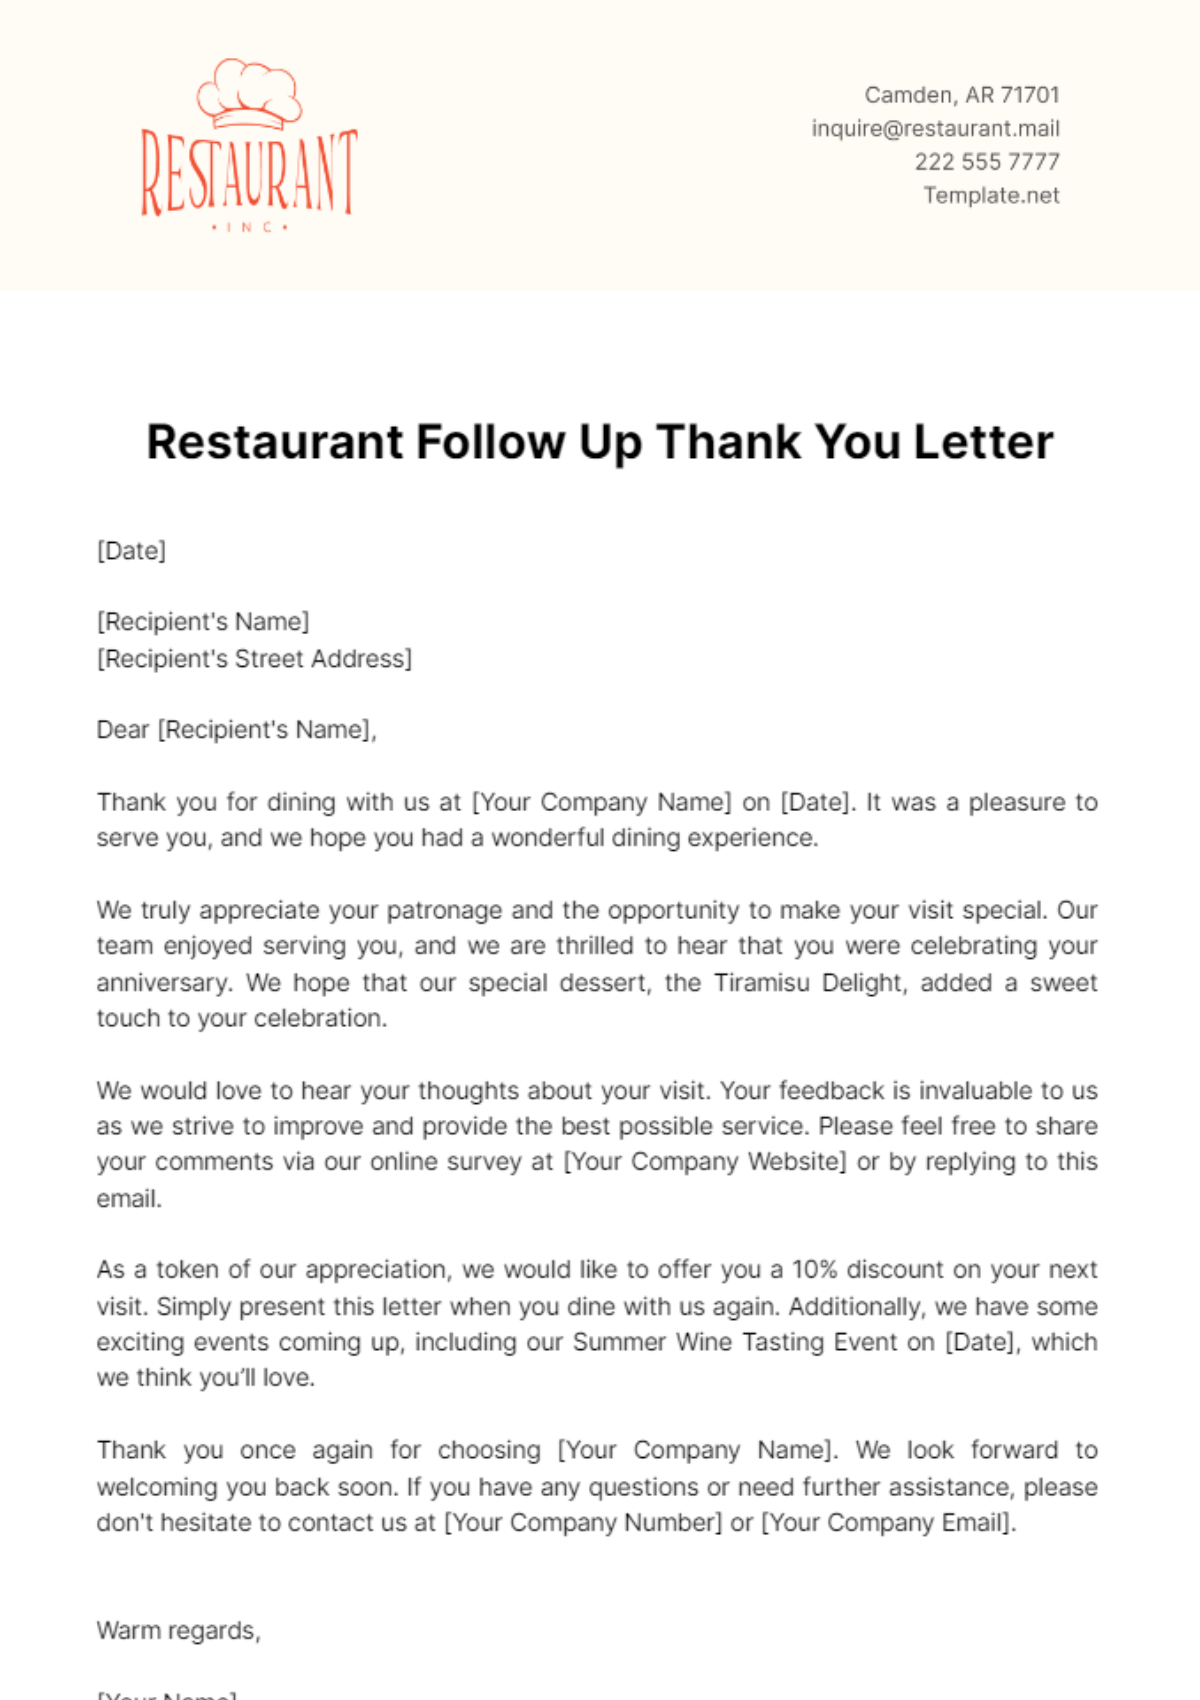 Free Restaurant Follow Up Thank You Letter Template